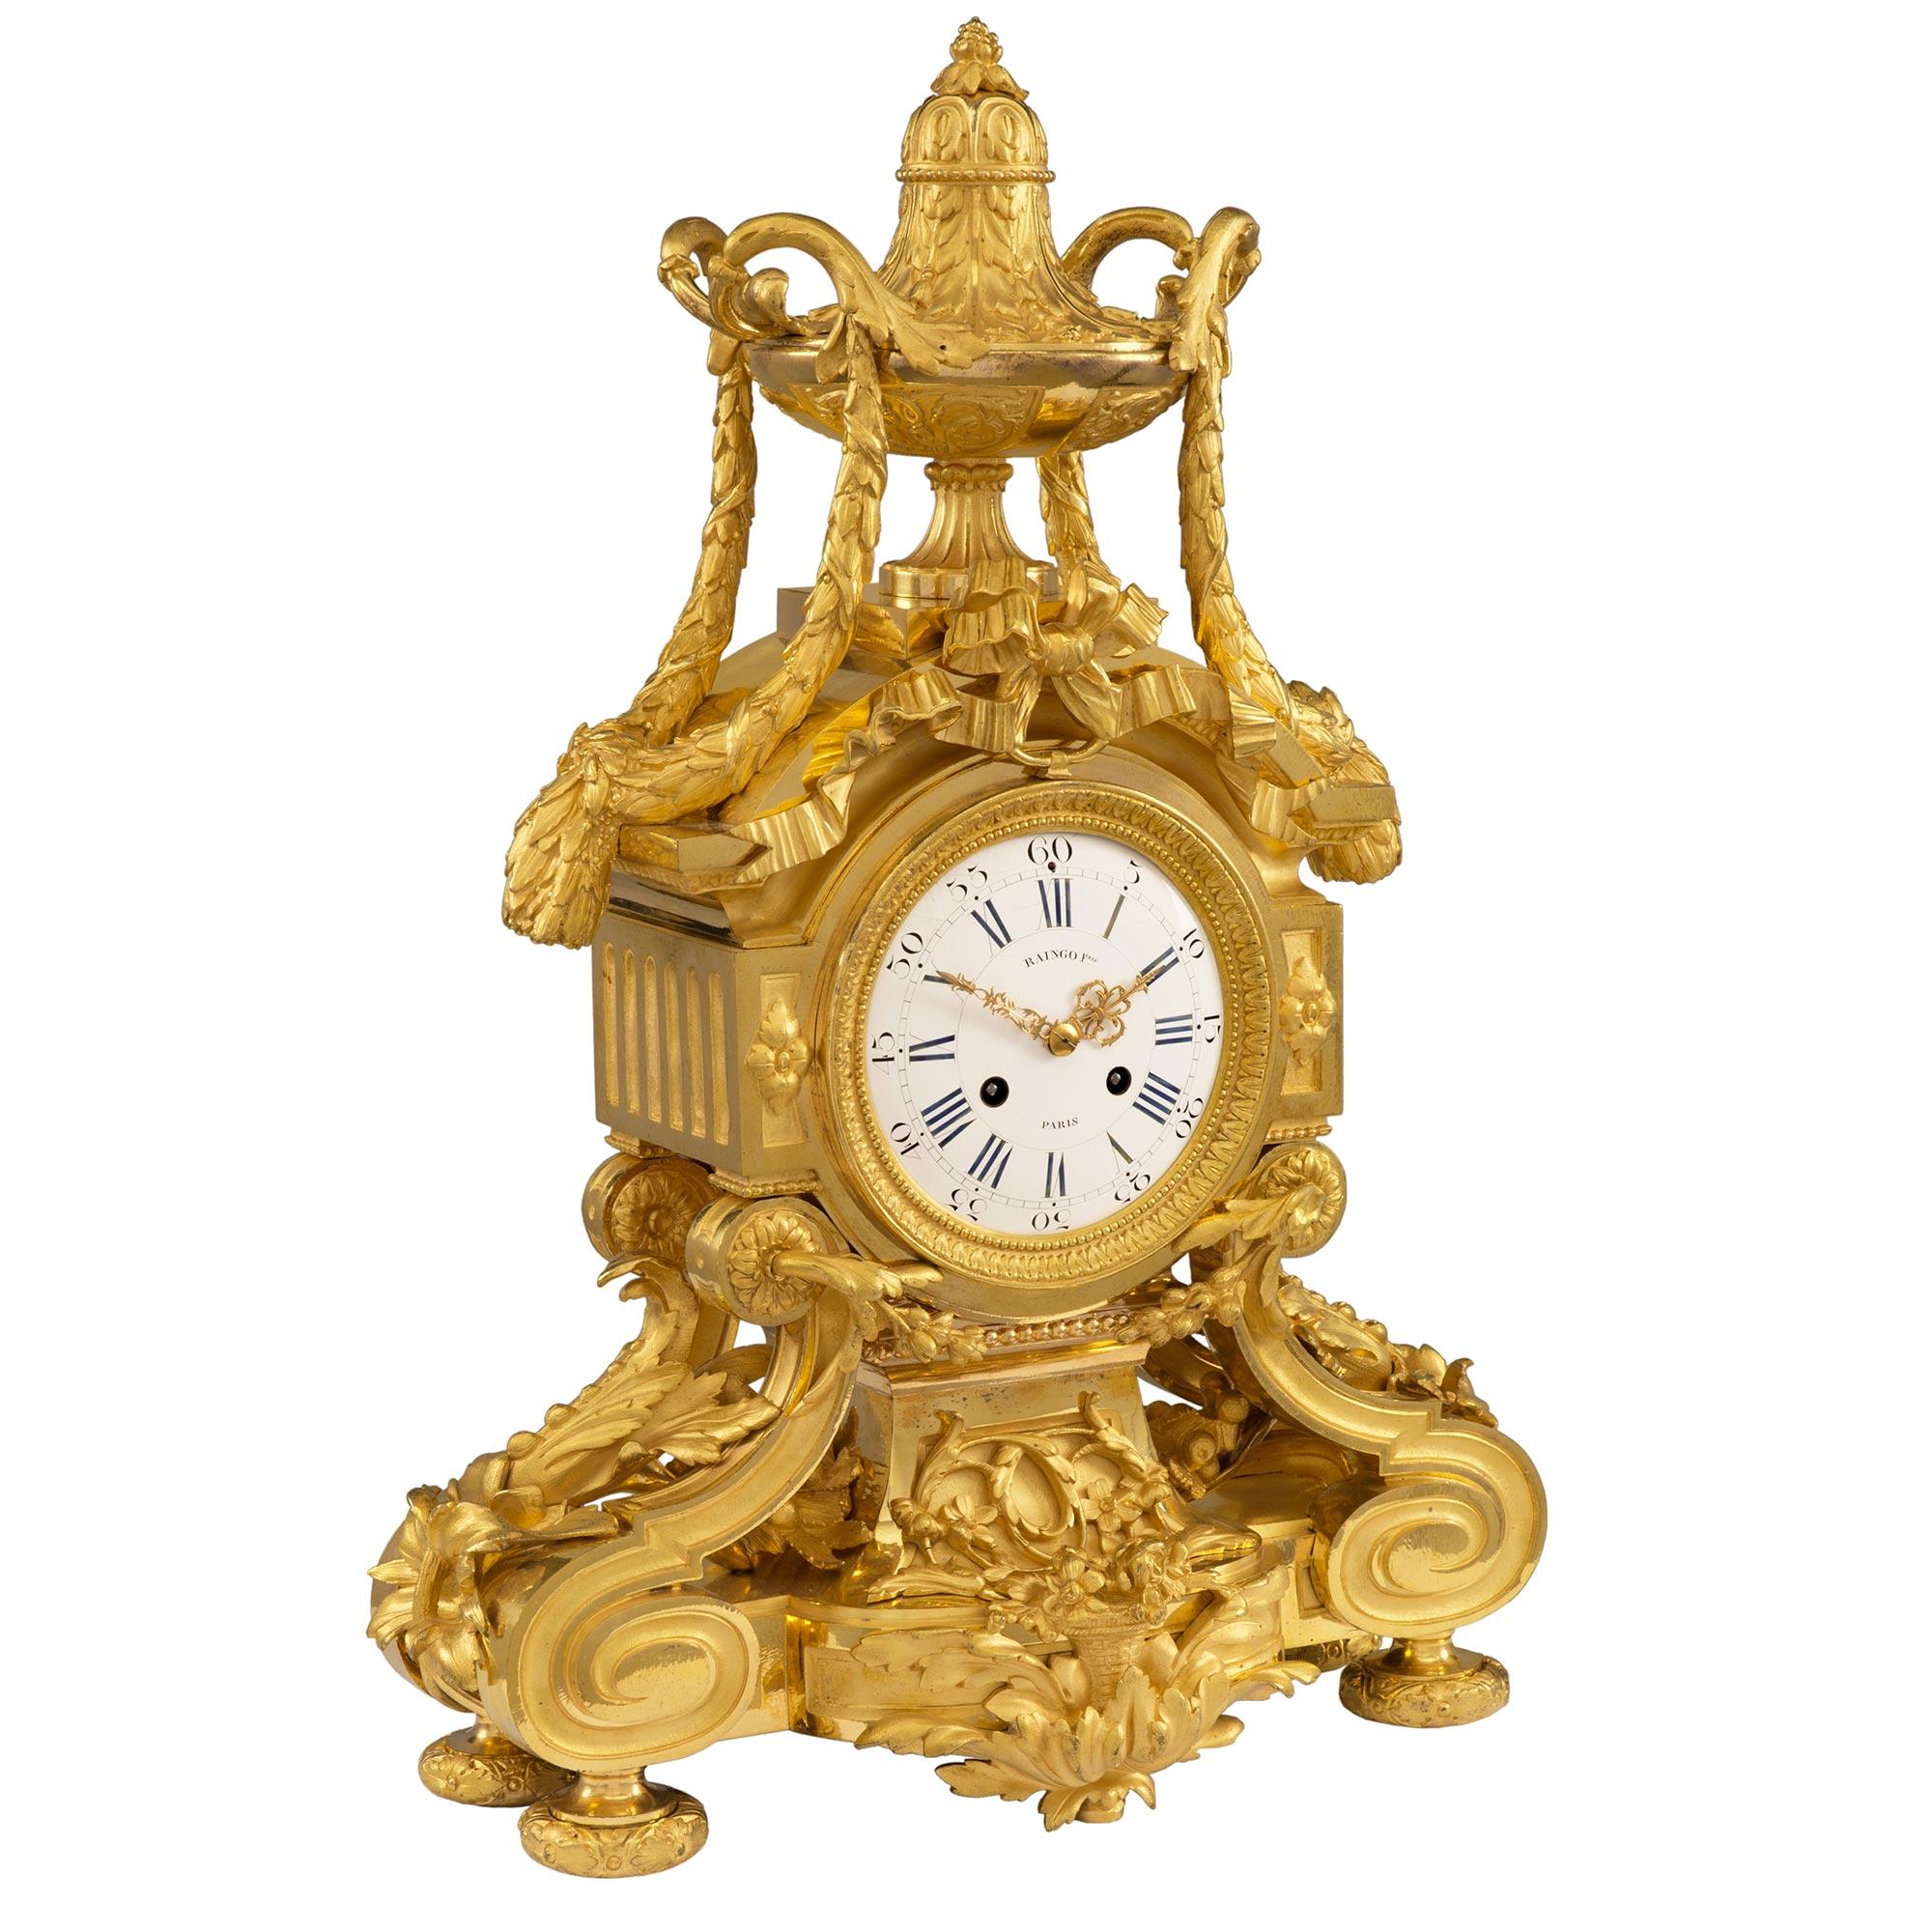 A striking and high quality French 19th century Louis XVI st. Belle Époque period ormolu clock signed by Raingo Frères. The clock is raised by lovely mottled feet with a floral design. Below the clock face is a stunning and richly chased acanthus